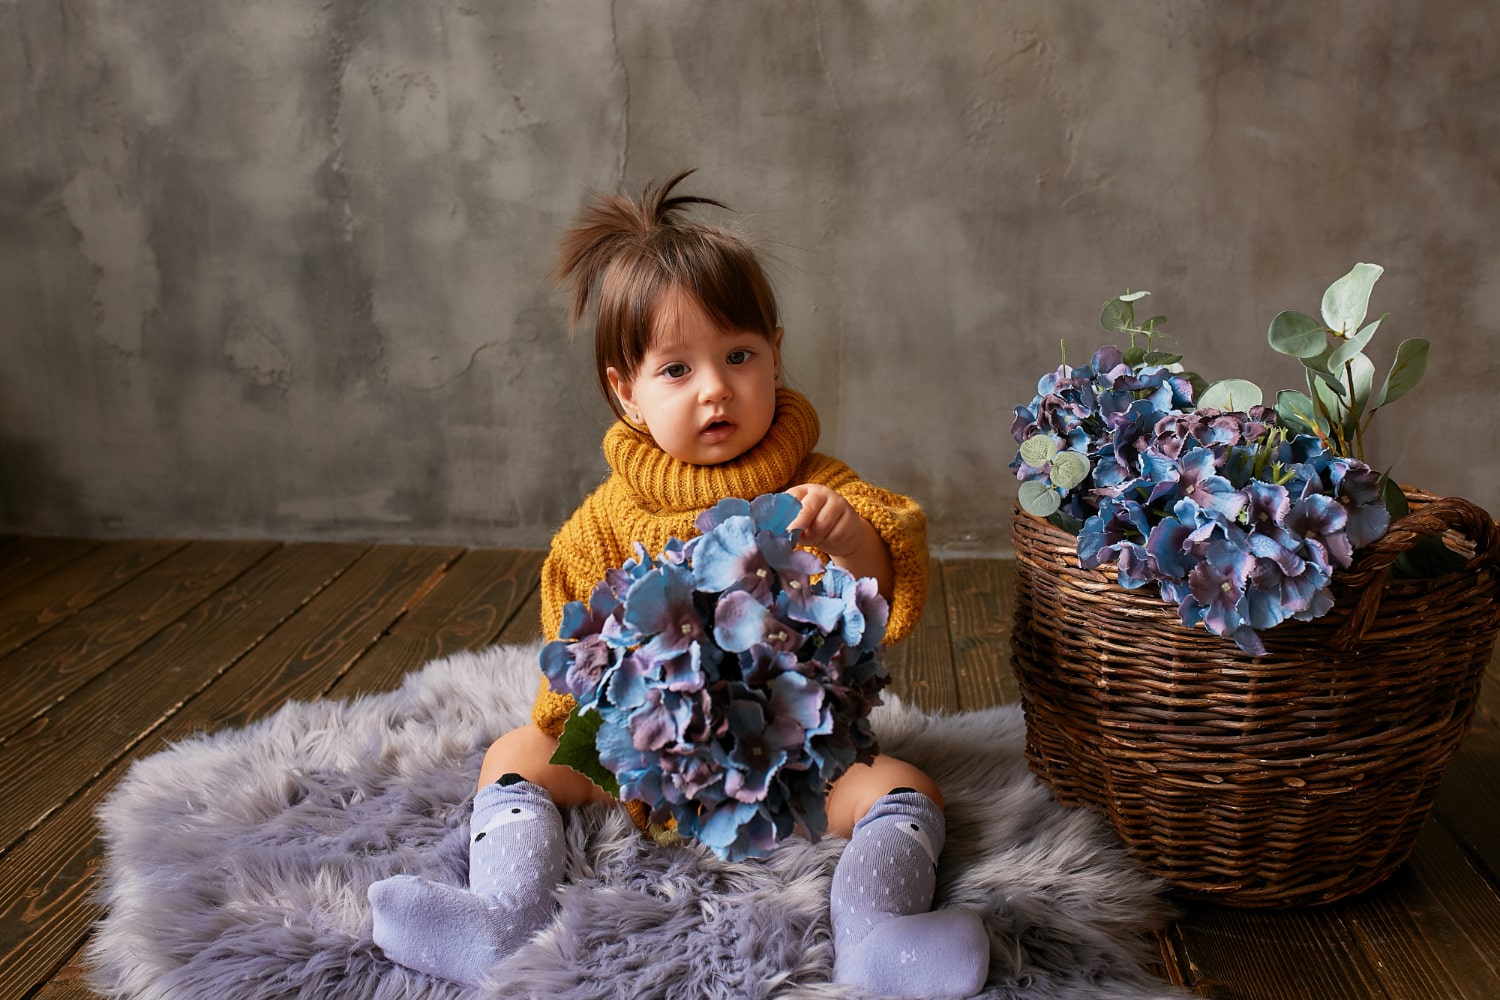 Enchanting blossoms: Charming 6-Month Baby's Floral Fantasy at Home